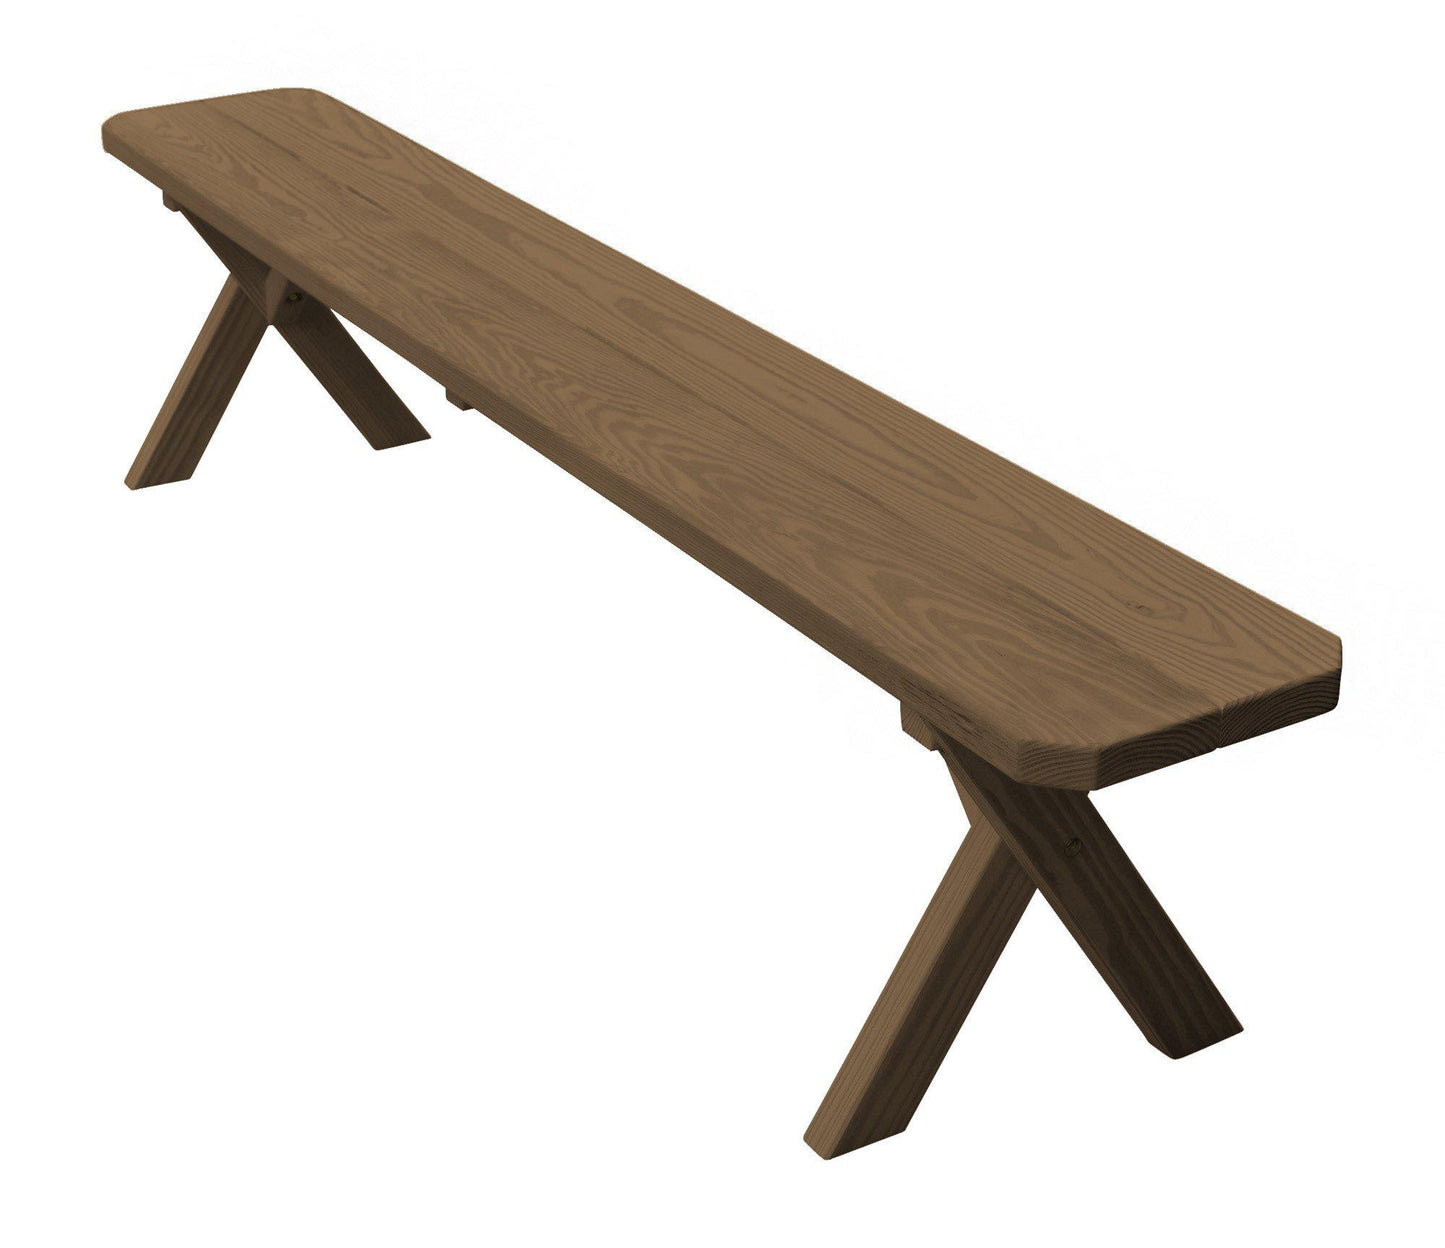 A&L Furniture Co. Yellow Pine 70" Crossleg Bench Only - LEAD TIME TO SHIP 10 BUSINESS DAYS